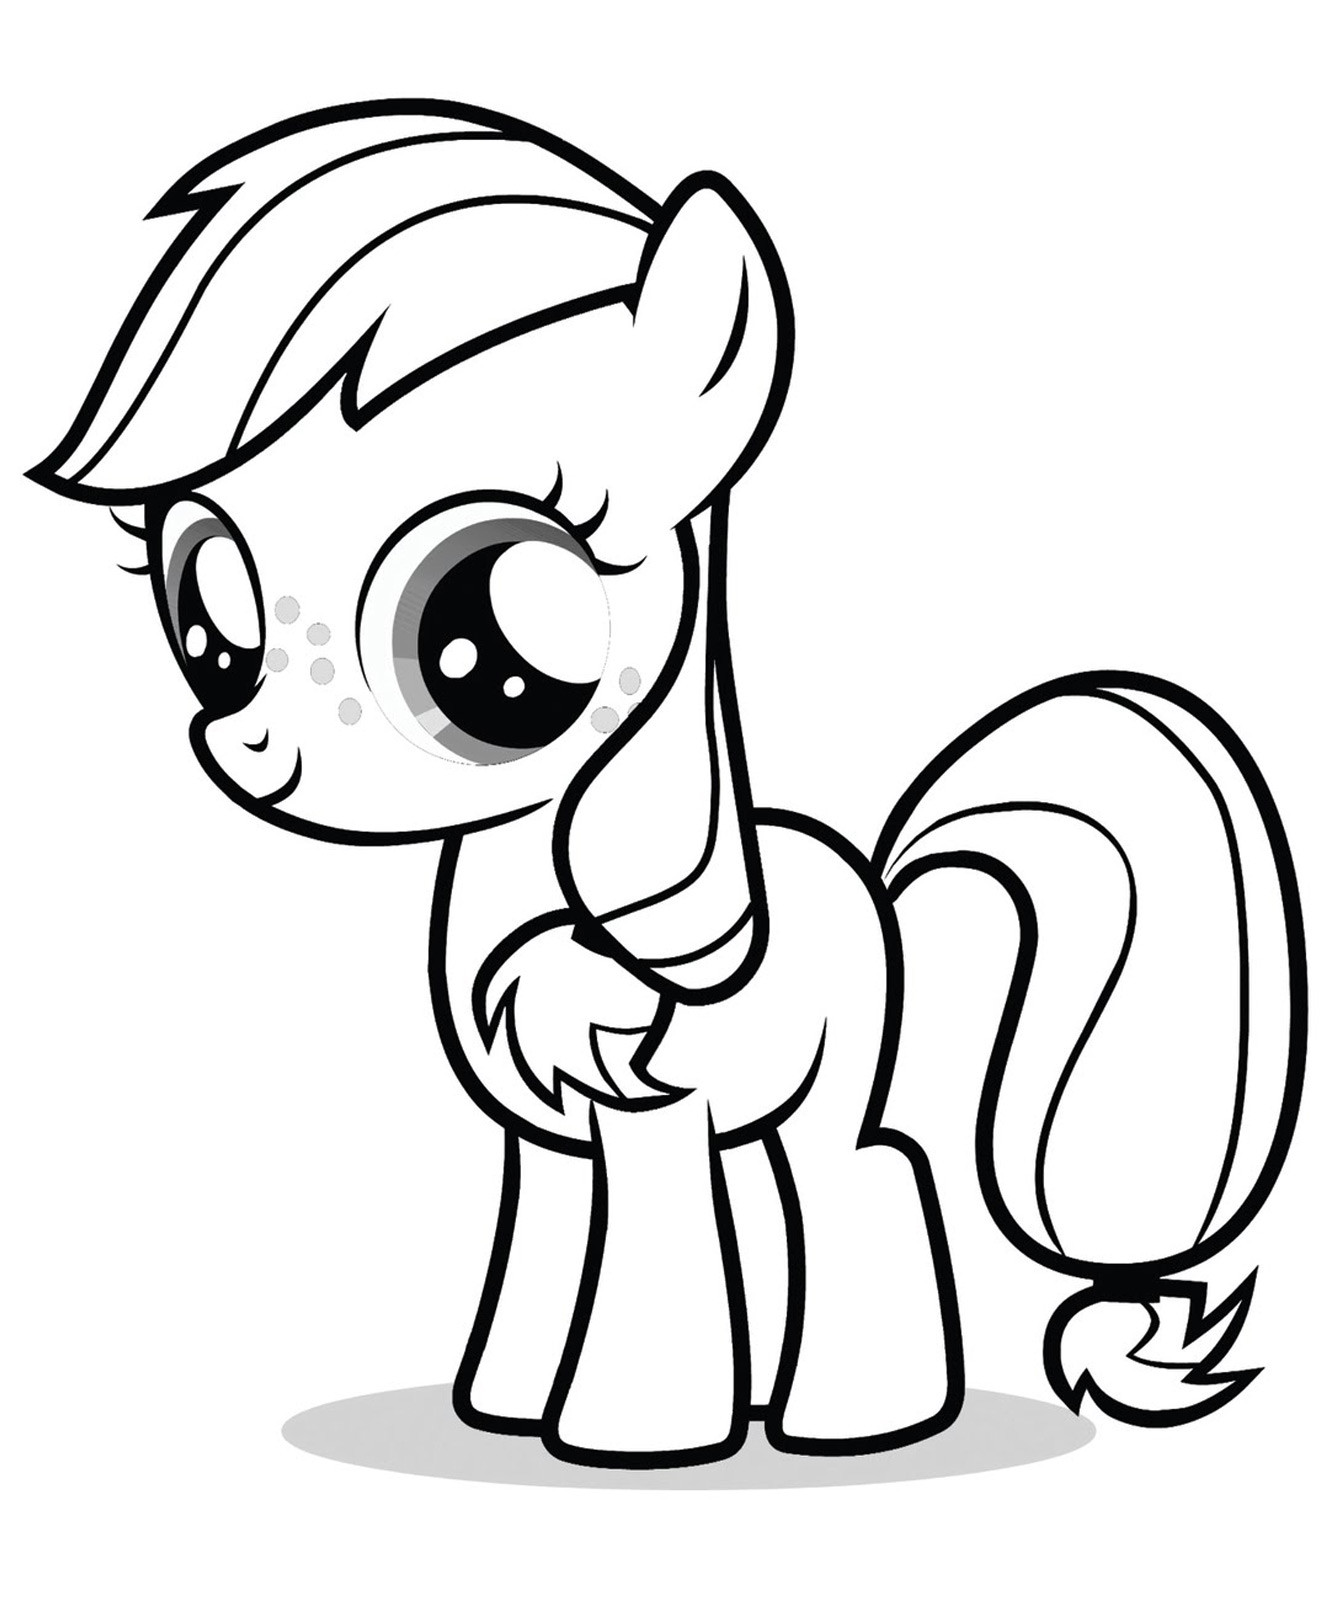 Small Coloring Pages For Kids
 Free Printable My Little Pony Coloring Pages For Kids